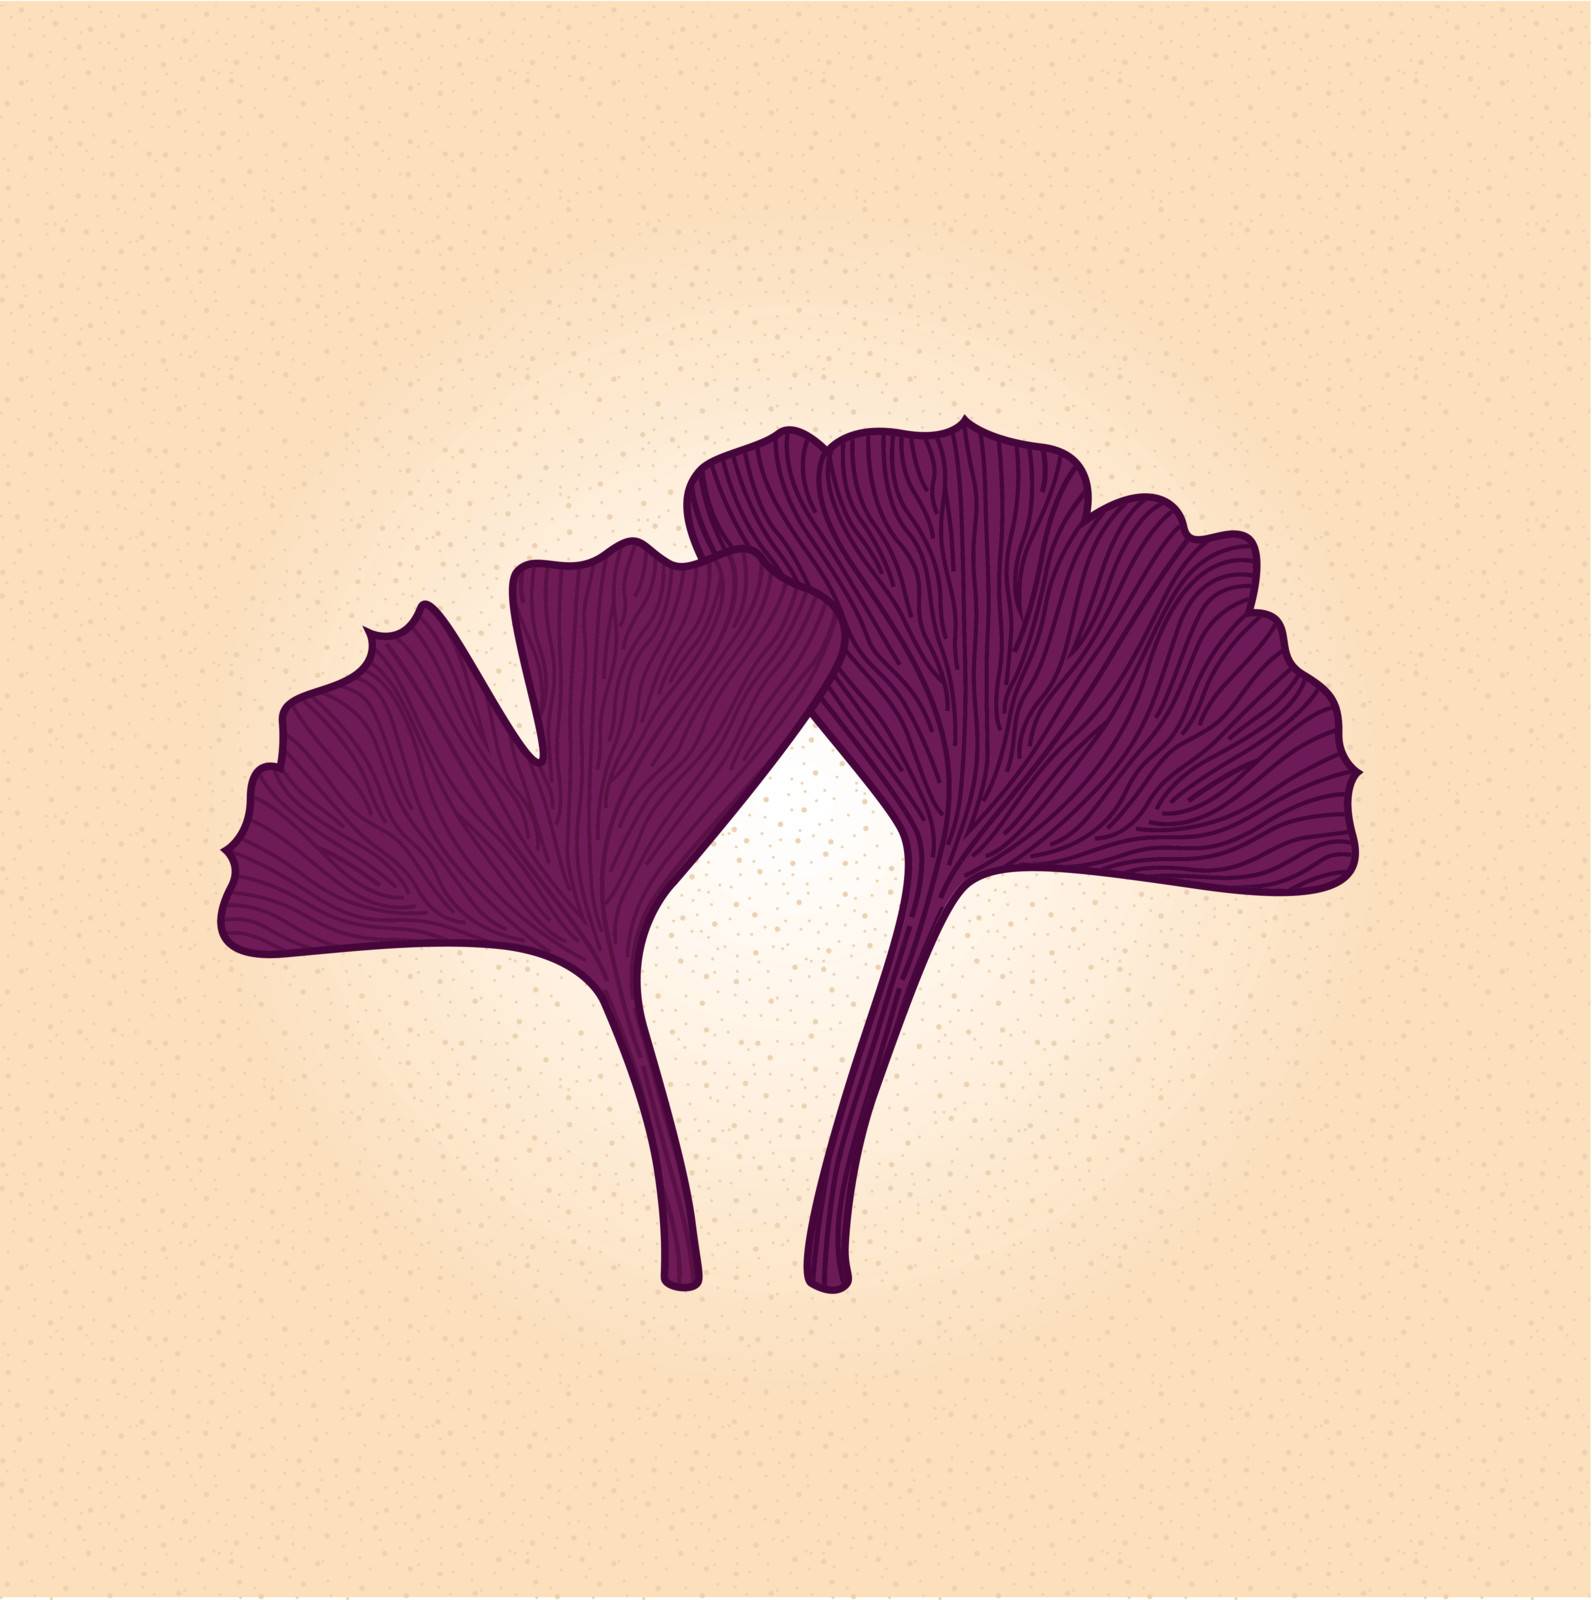 Purple gingko leaf isolated on brown background by Lordalea